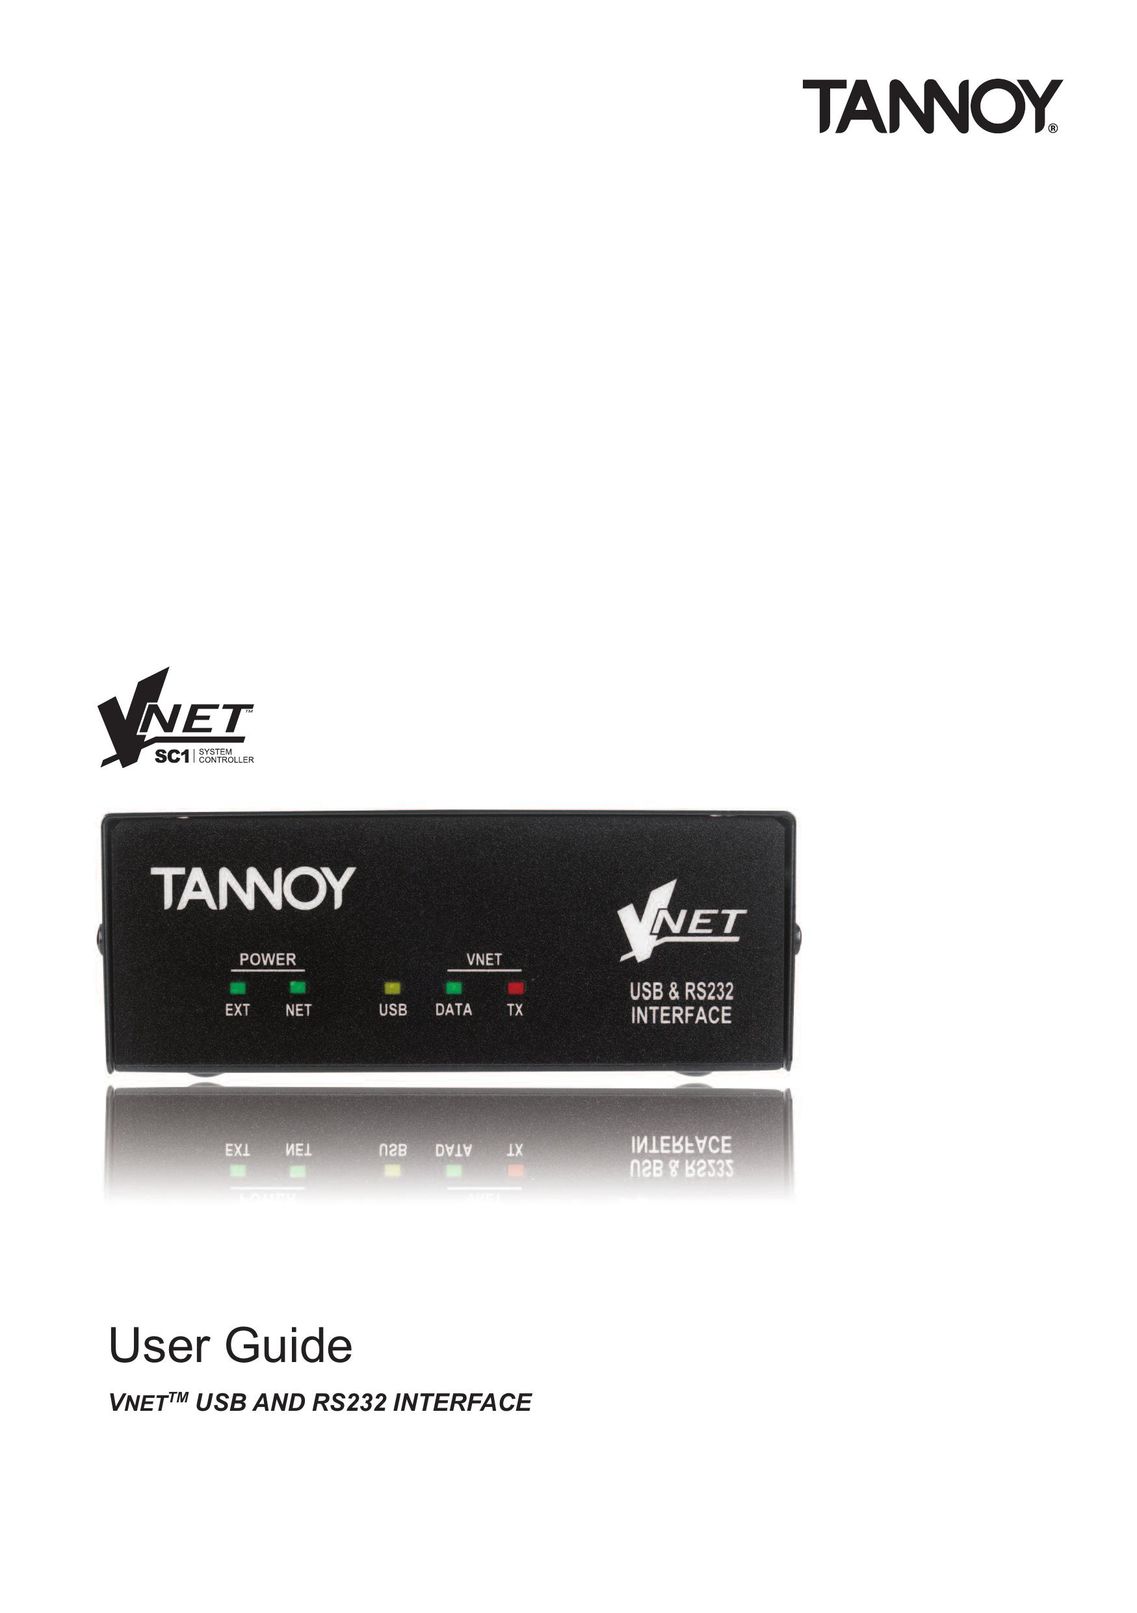 Tannoy SC1 Computer Drive User Manual